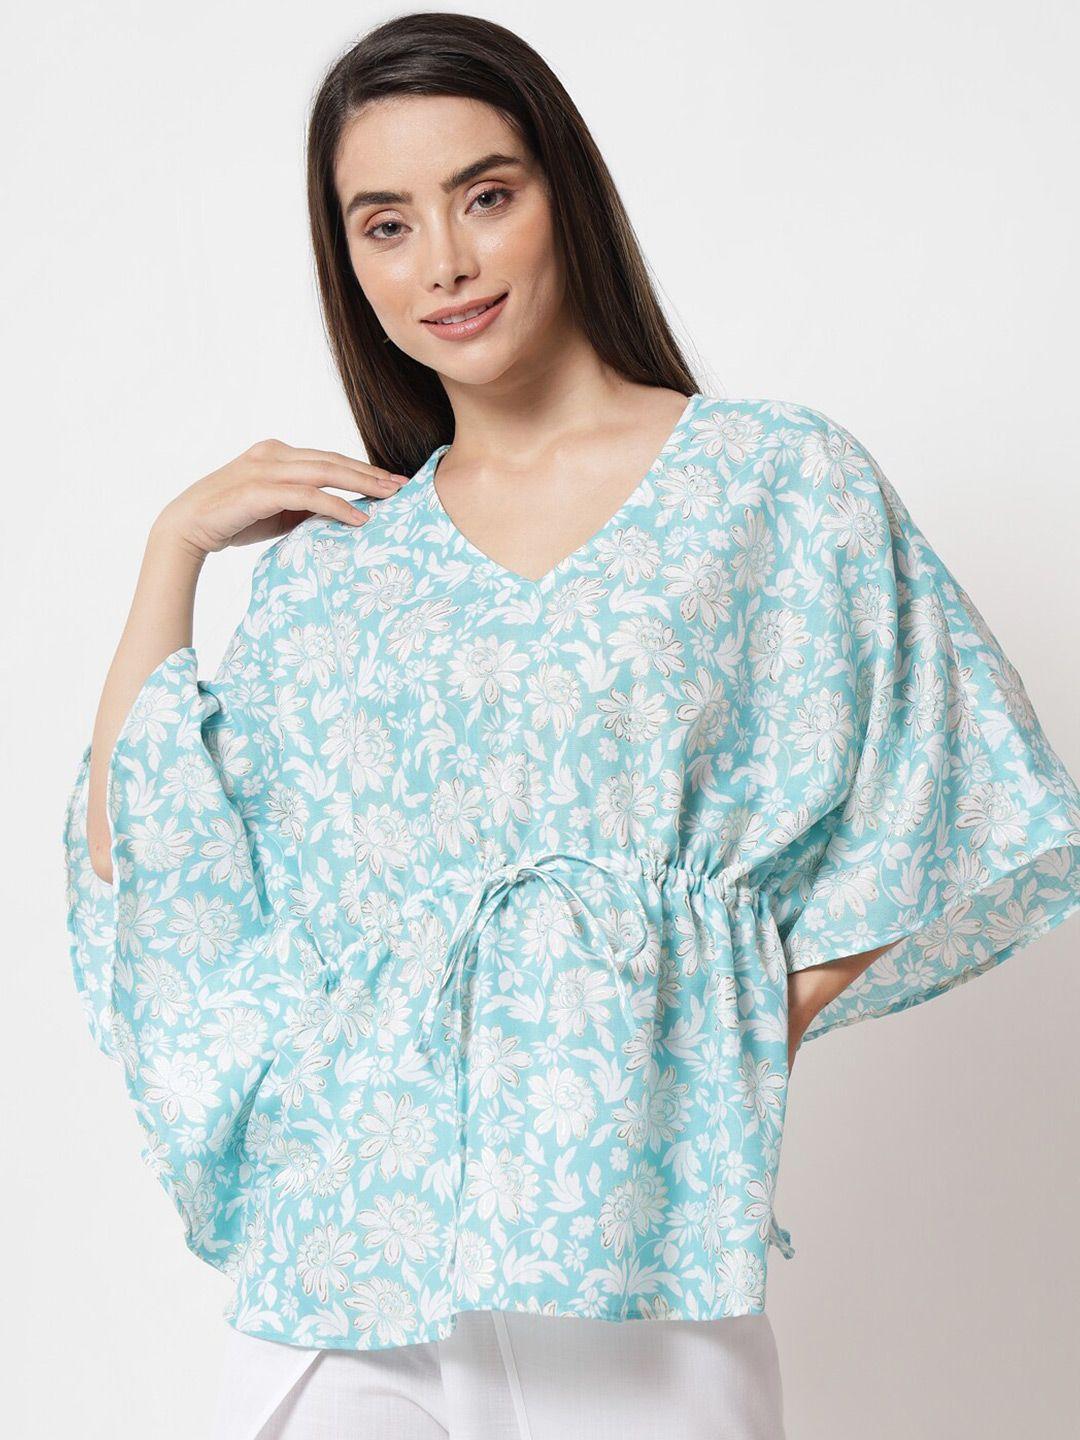 9rasa turquoise blue floral print cinched waist top